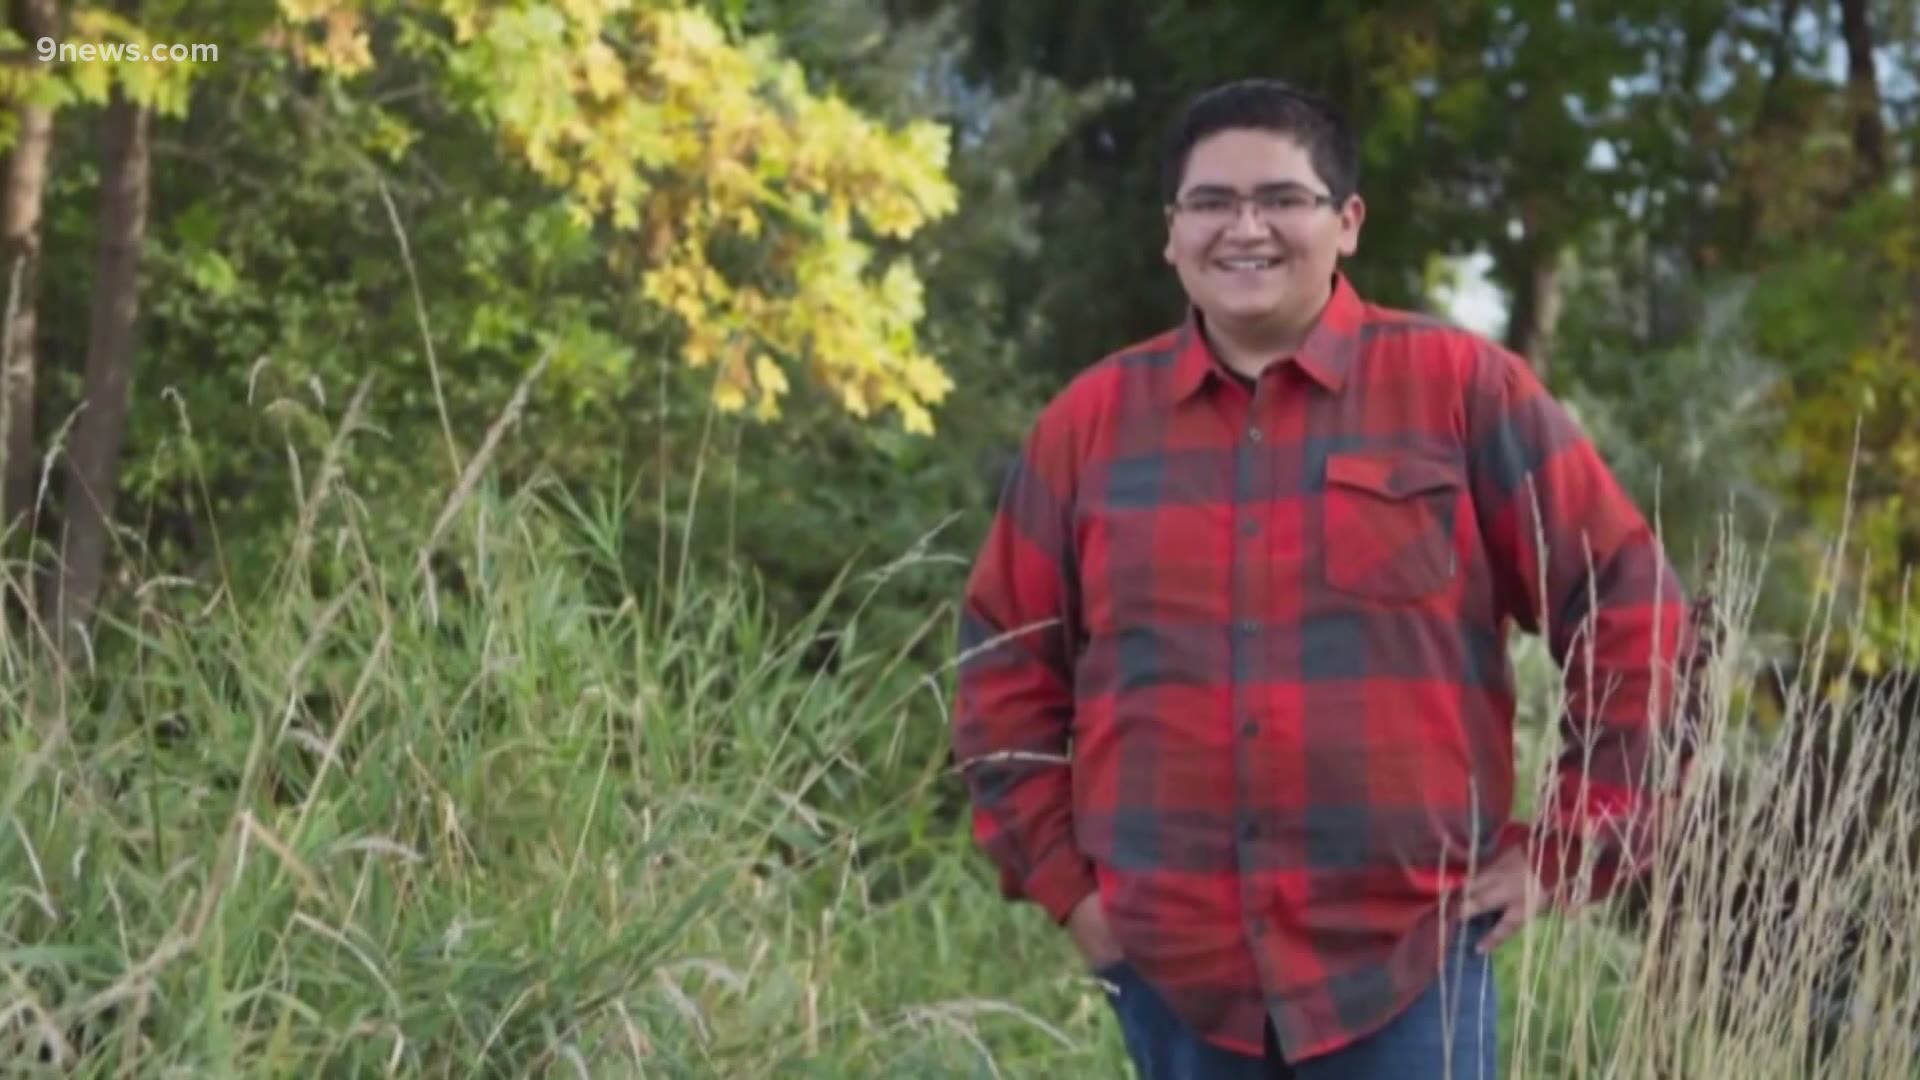 Kendrick Castillo's life was honored by family and friends today.